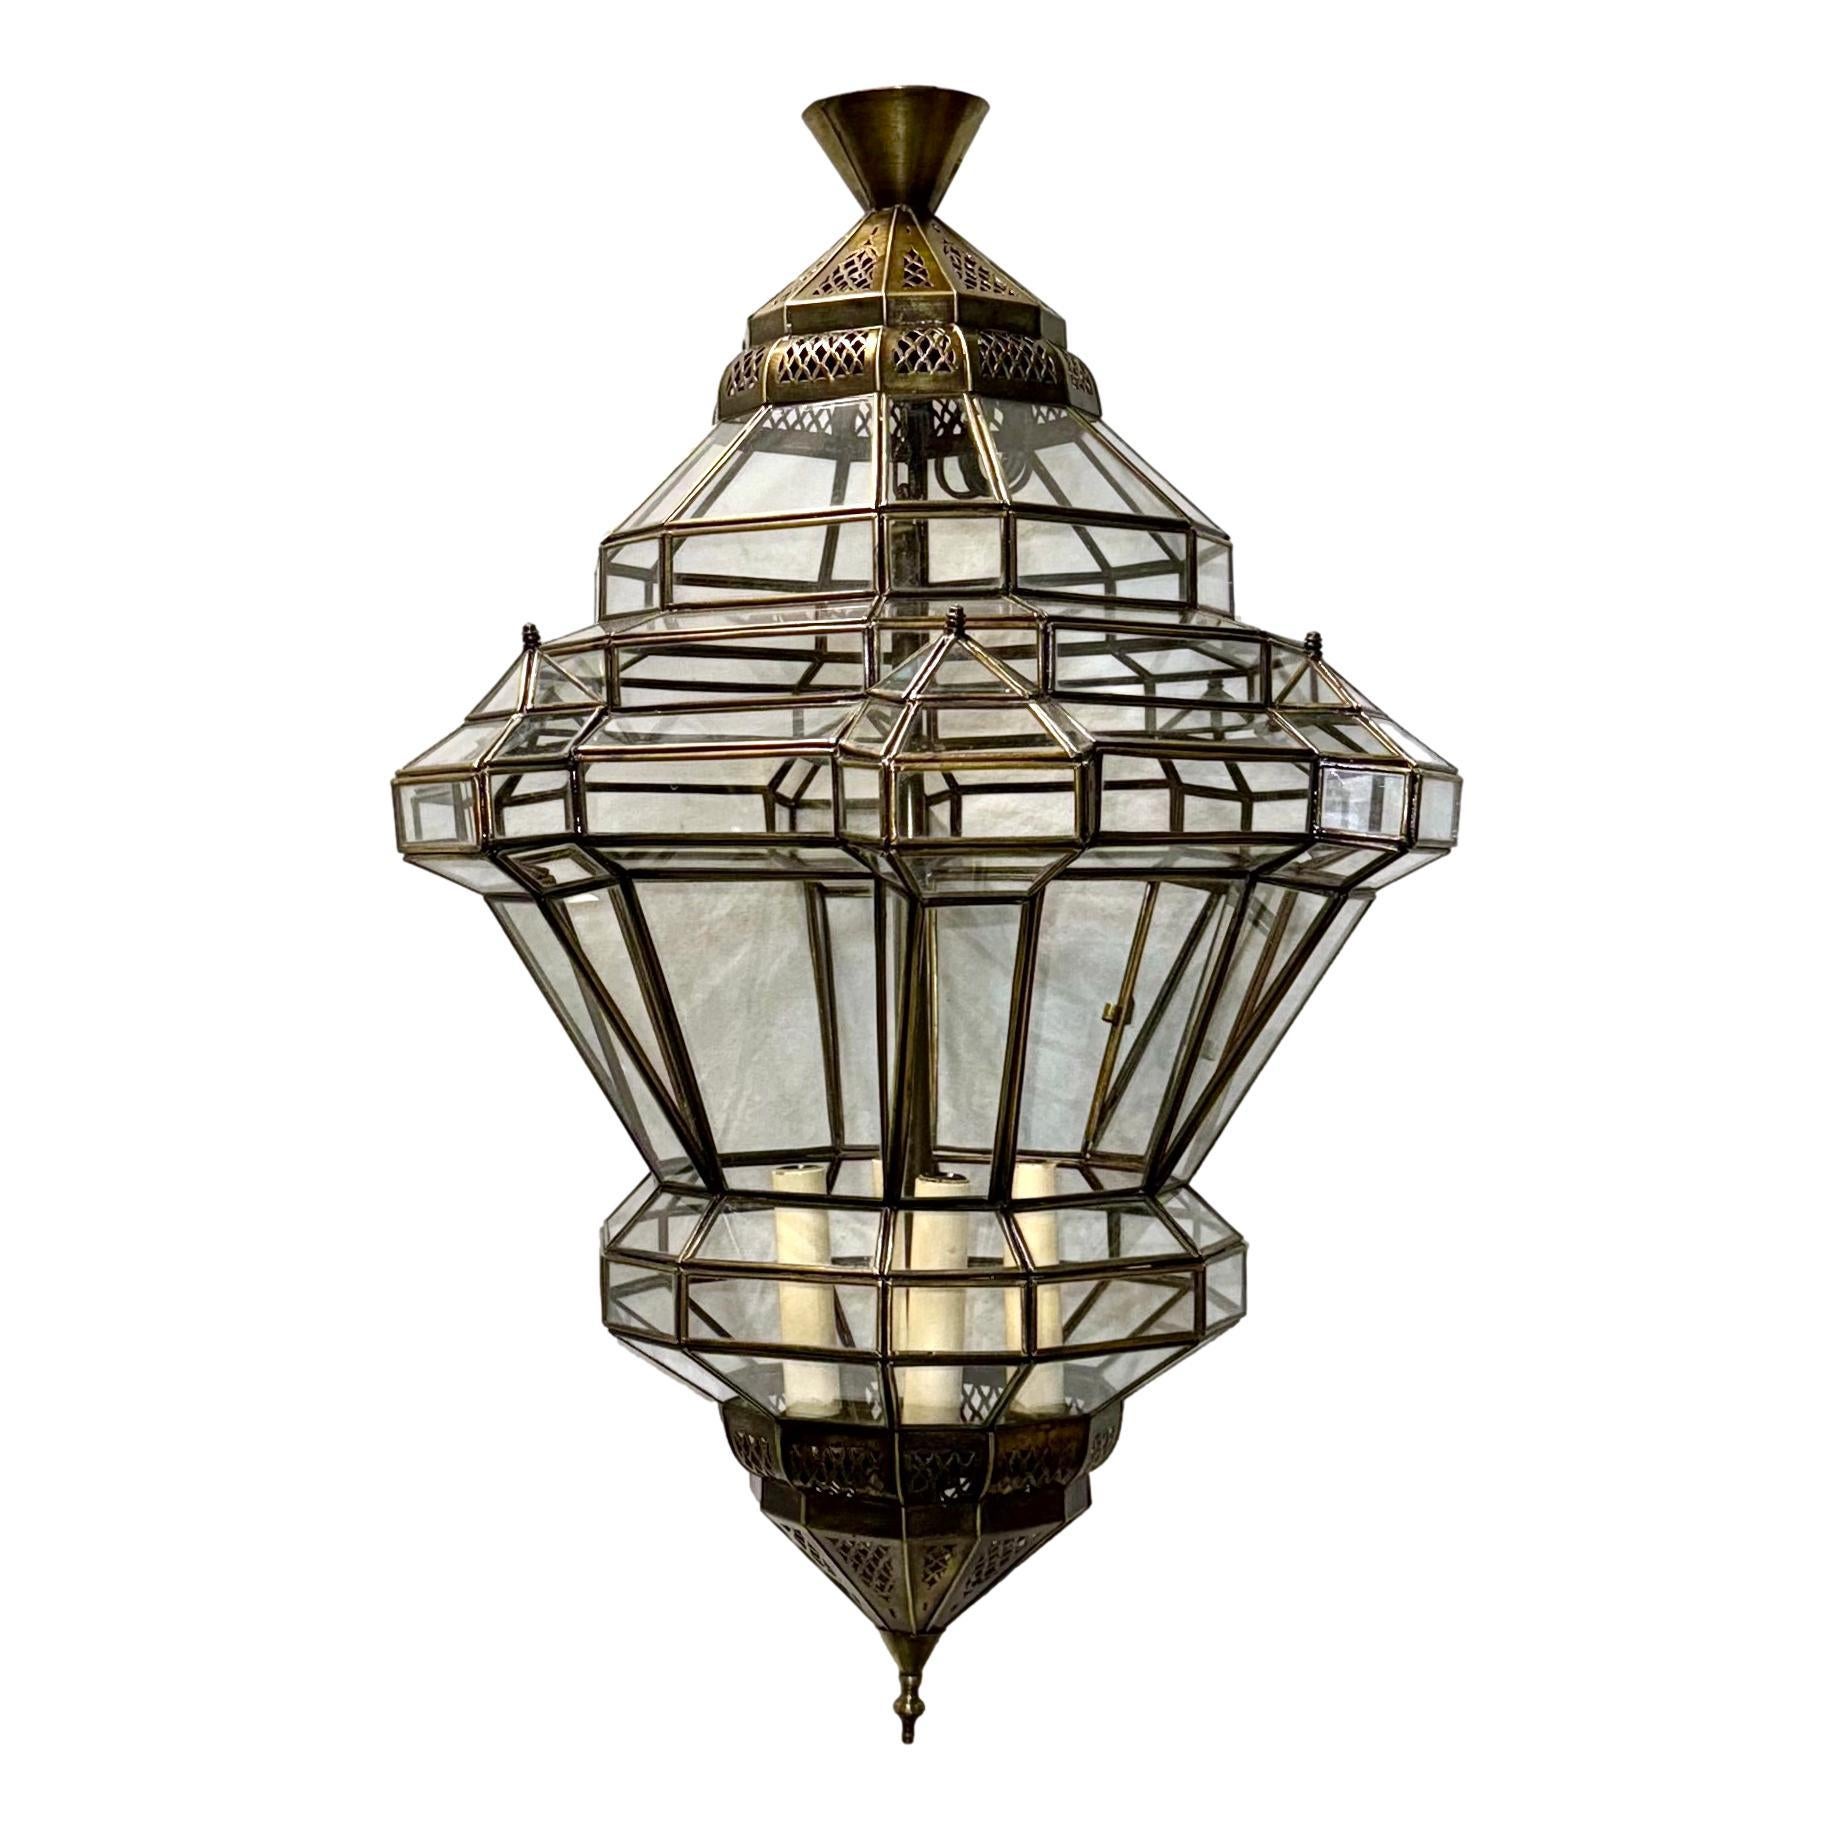 Pair of circa 1960's Moroccan metal lanterns with glass panels. Sold individually.

Measurements:
Drop: 34